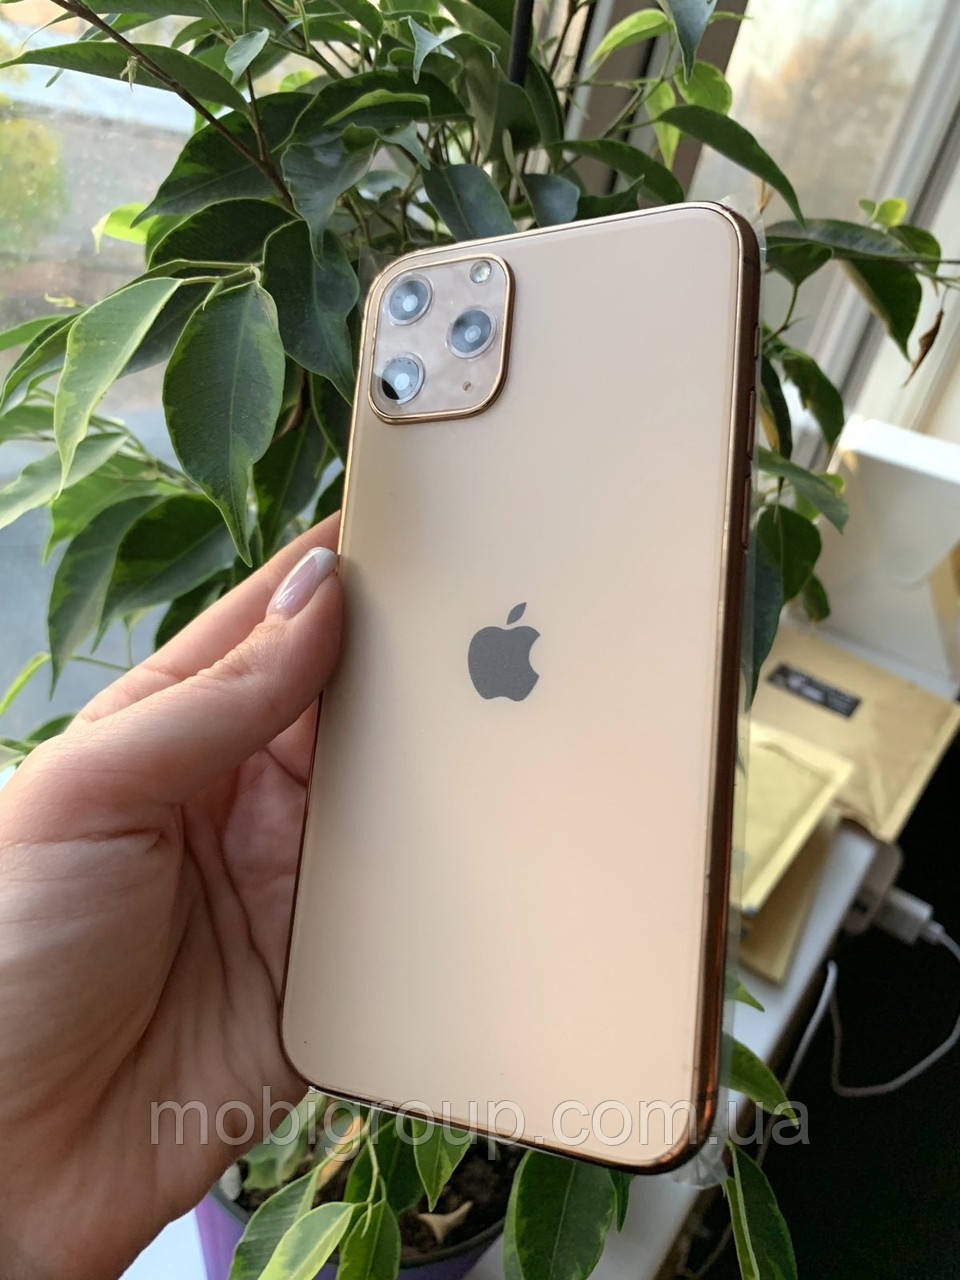 Муляж/Макет iPhone 11 Pro Max, Gold